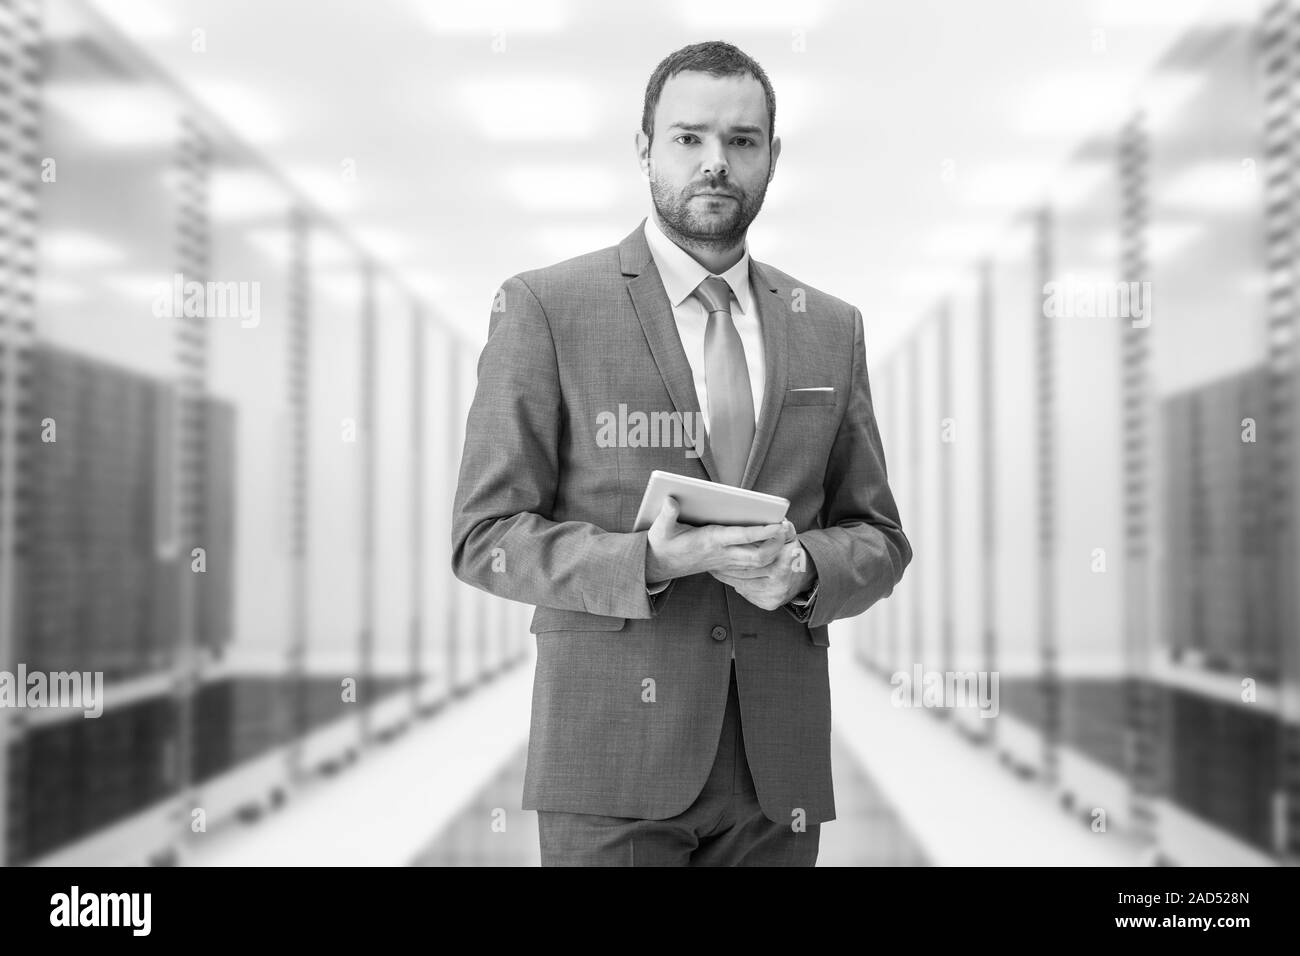 Young Businessman in server room Stock Photo